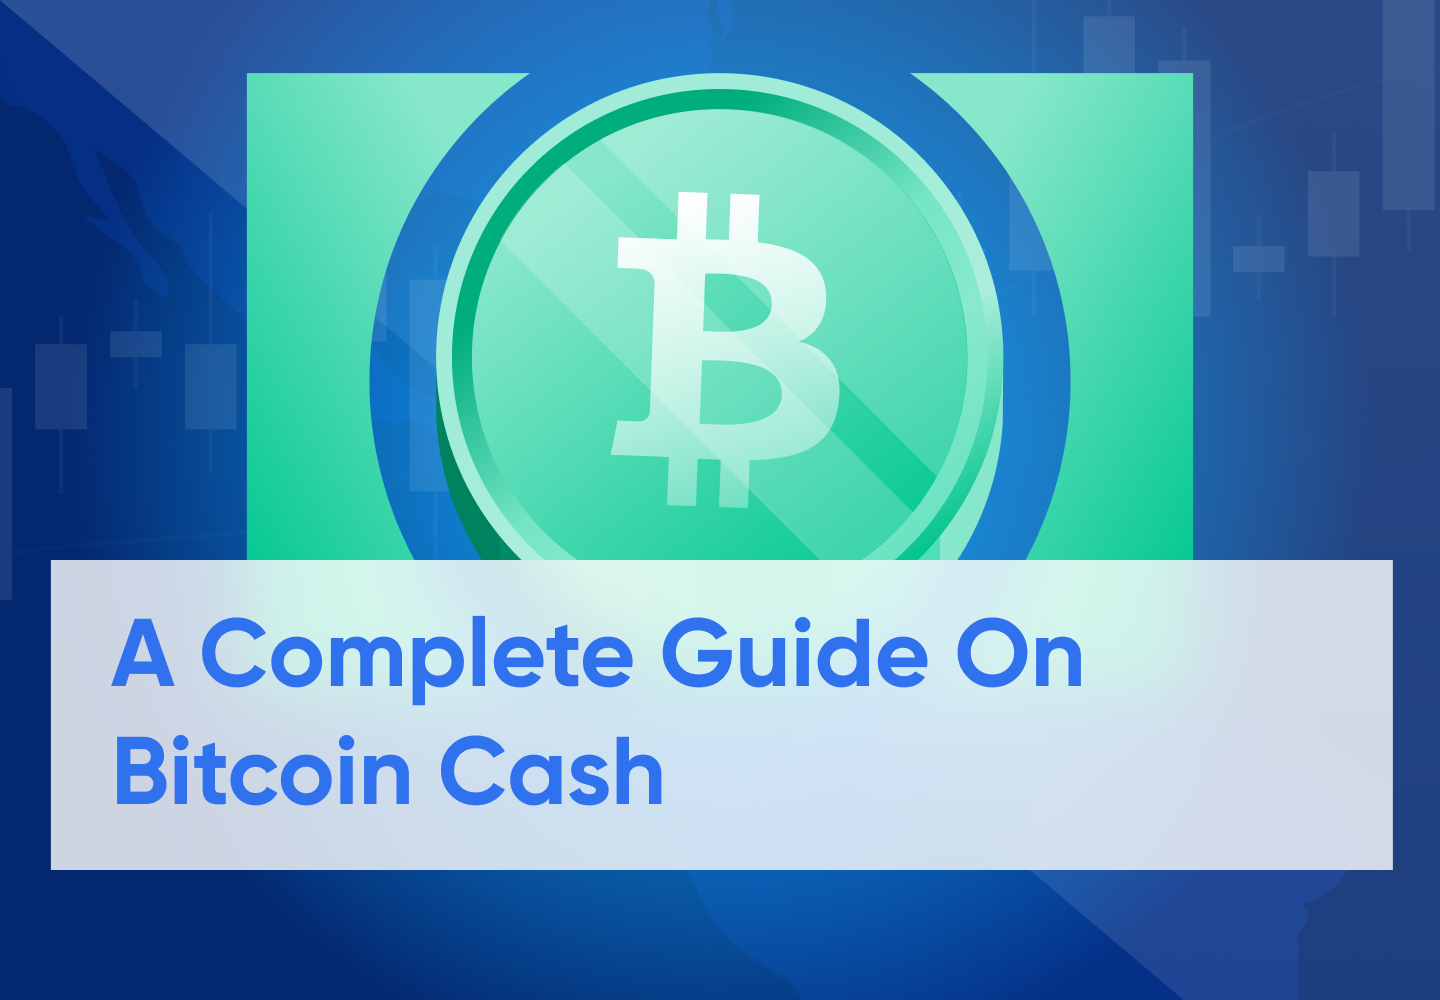 Bitcoin Cash Overview